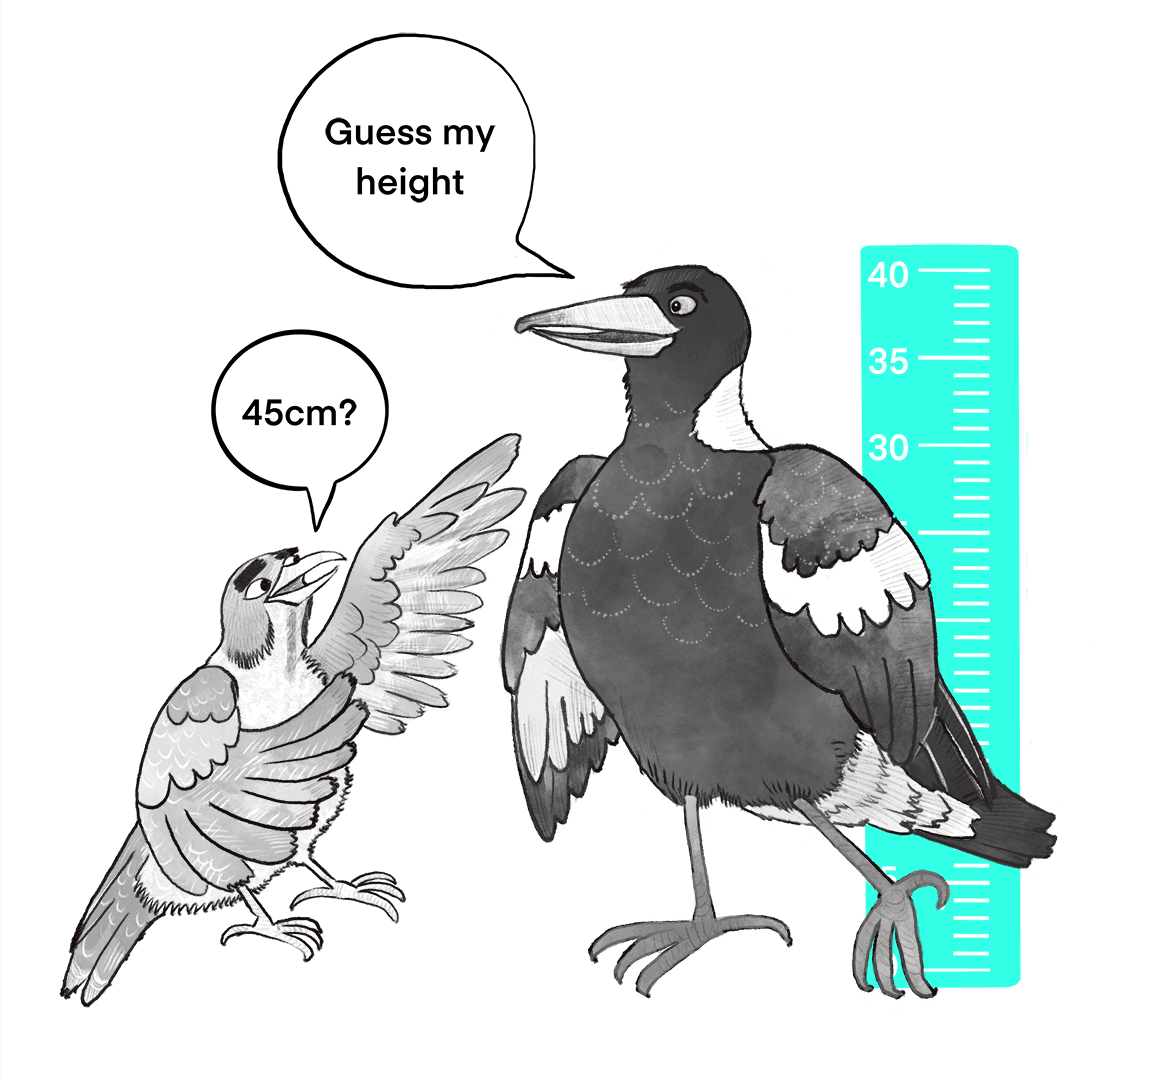 A magpie says 'guess my height' and a noisy miner bird replies '45cm?' 
           Behind there is a tape measure indicating that the magpie is actually 40cm tall.